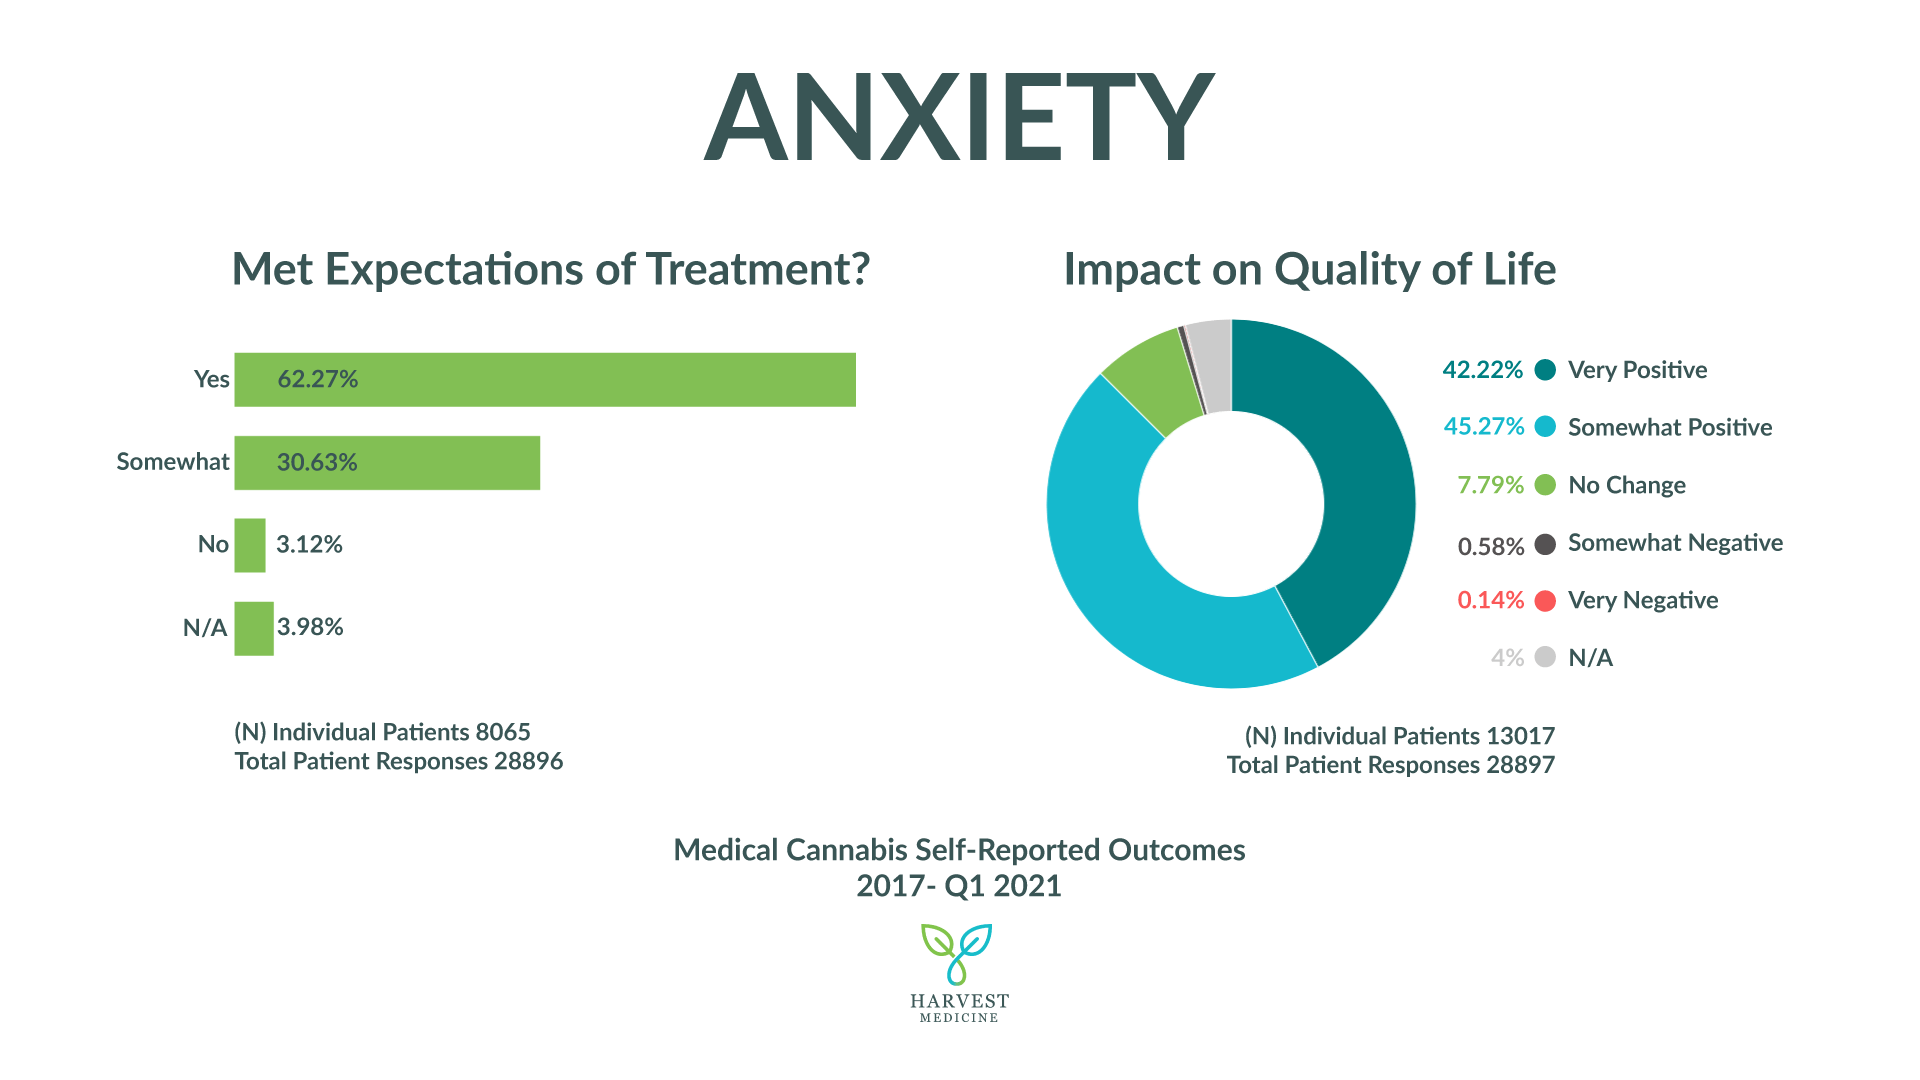 Harvest Medicine's patient self-reported outcomes for anxiety from 2017-2021. Sample size 8065 and 13017